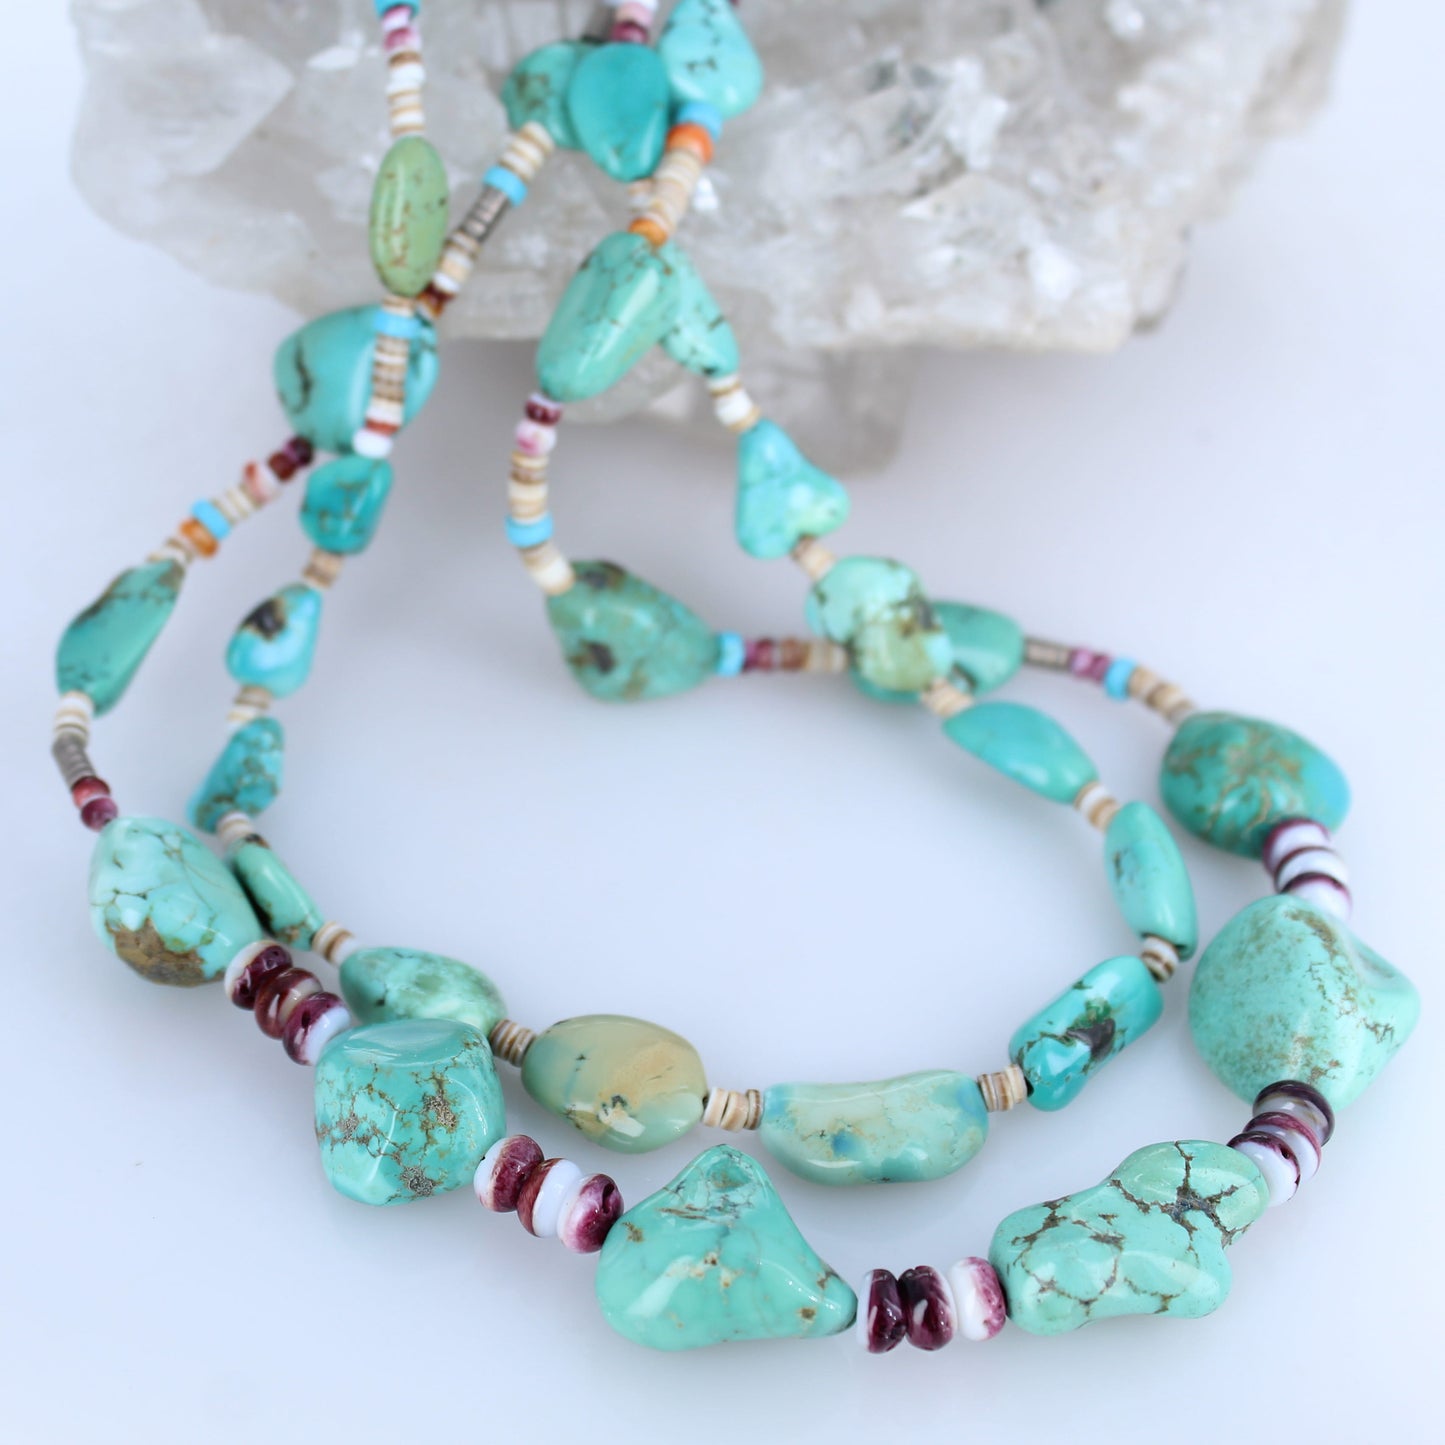 Carico Lake Turquoise Necklace Fiesta Colors 2 Strand 28"